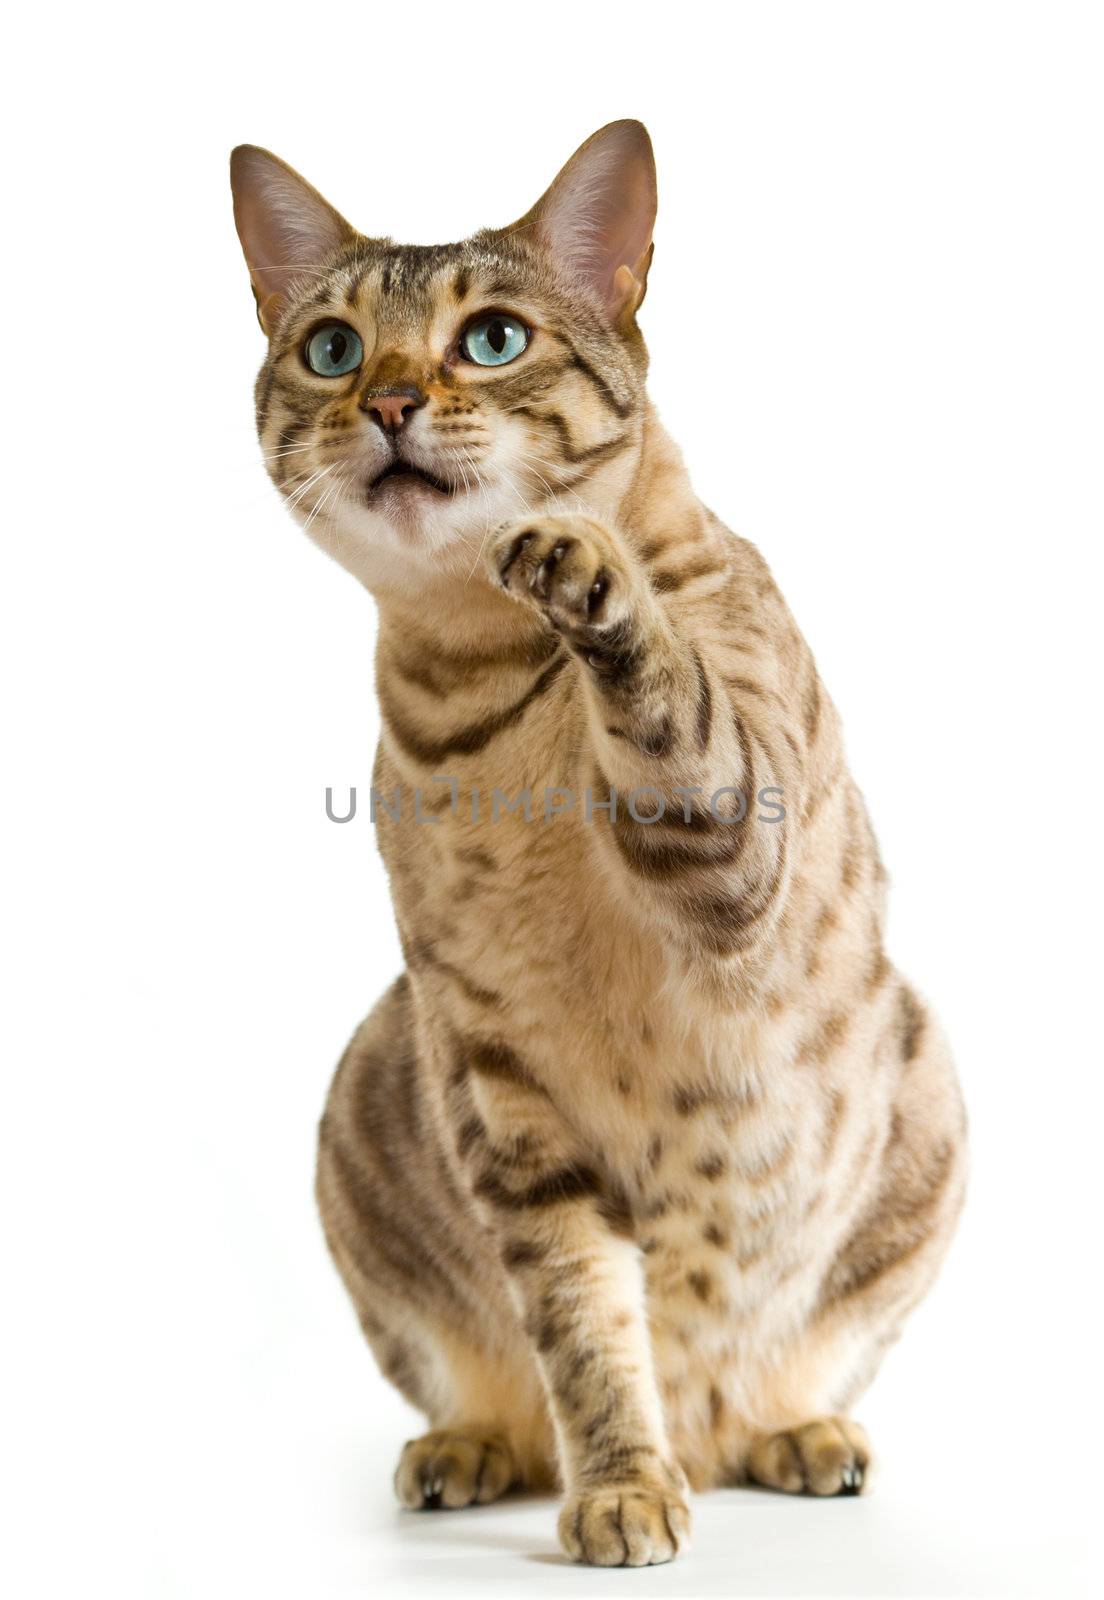 Bengal cat clawing at the air by steheap